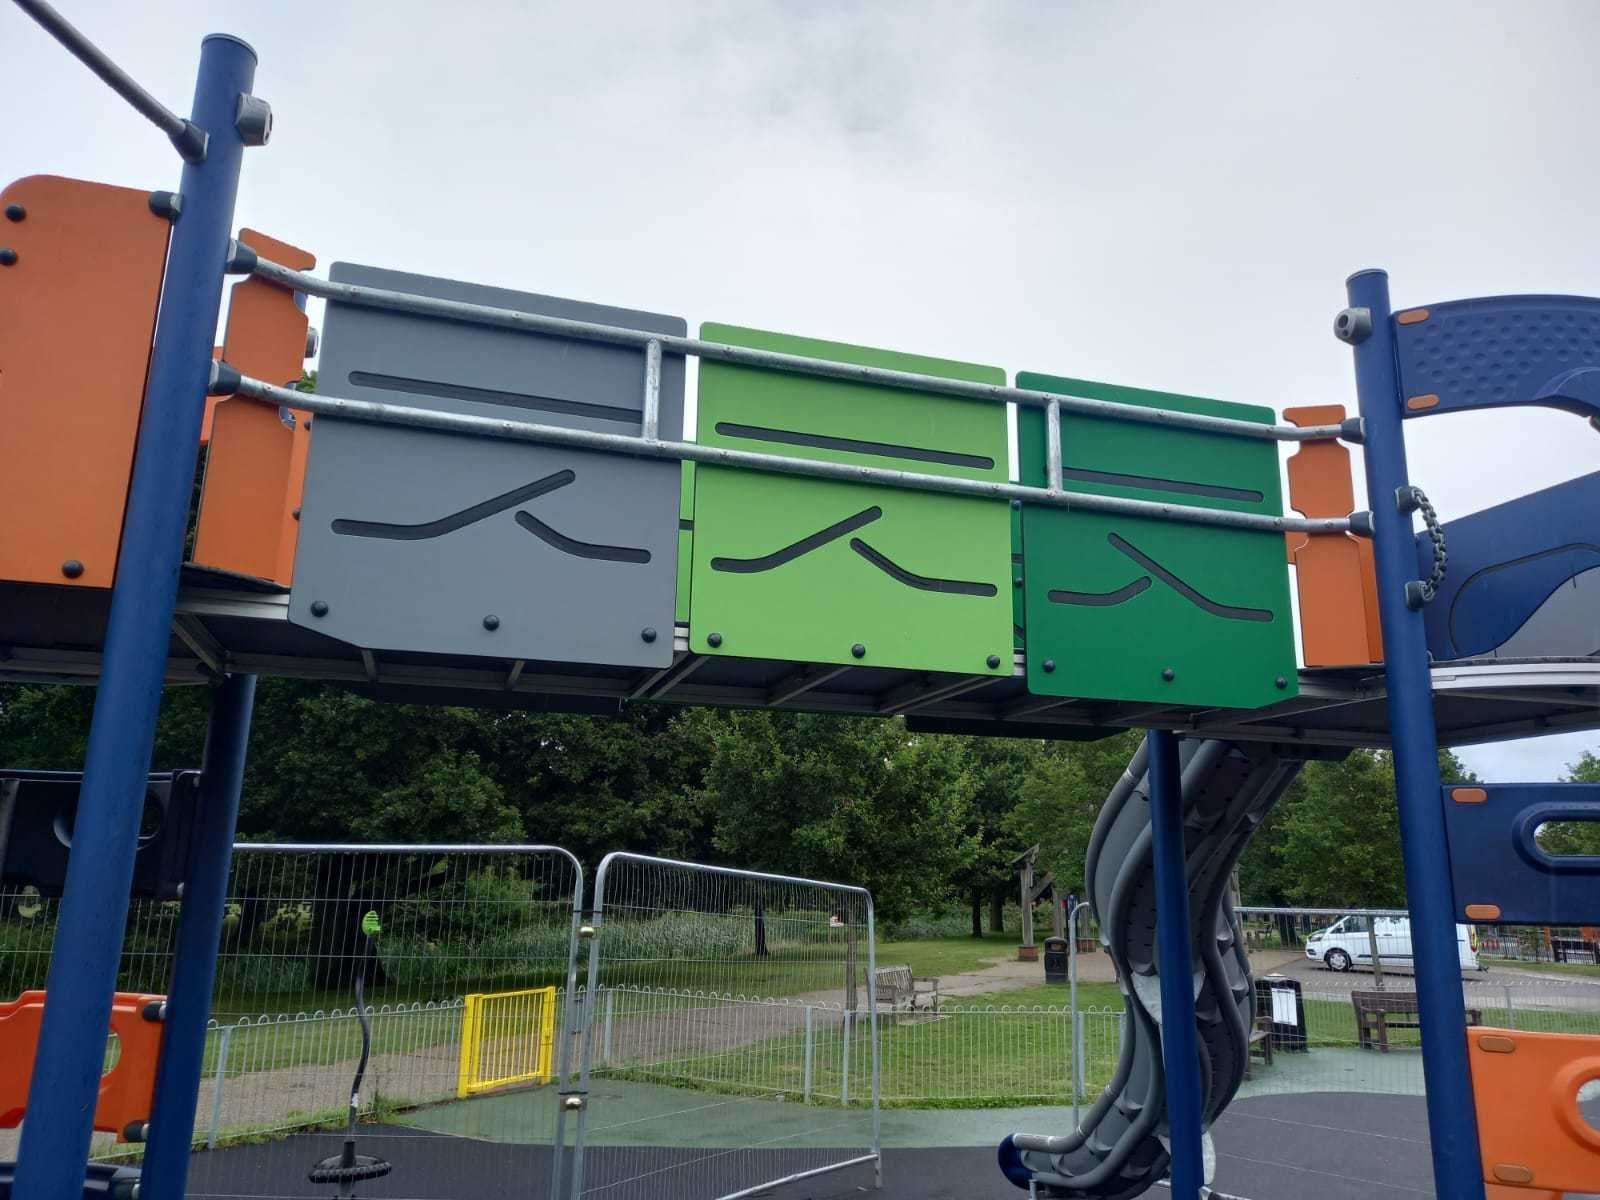 The new equipment at the park in Ashford. Picture: ABC